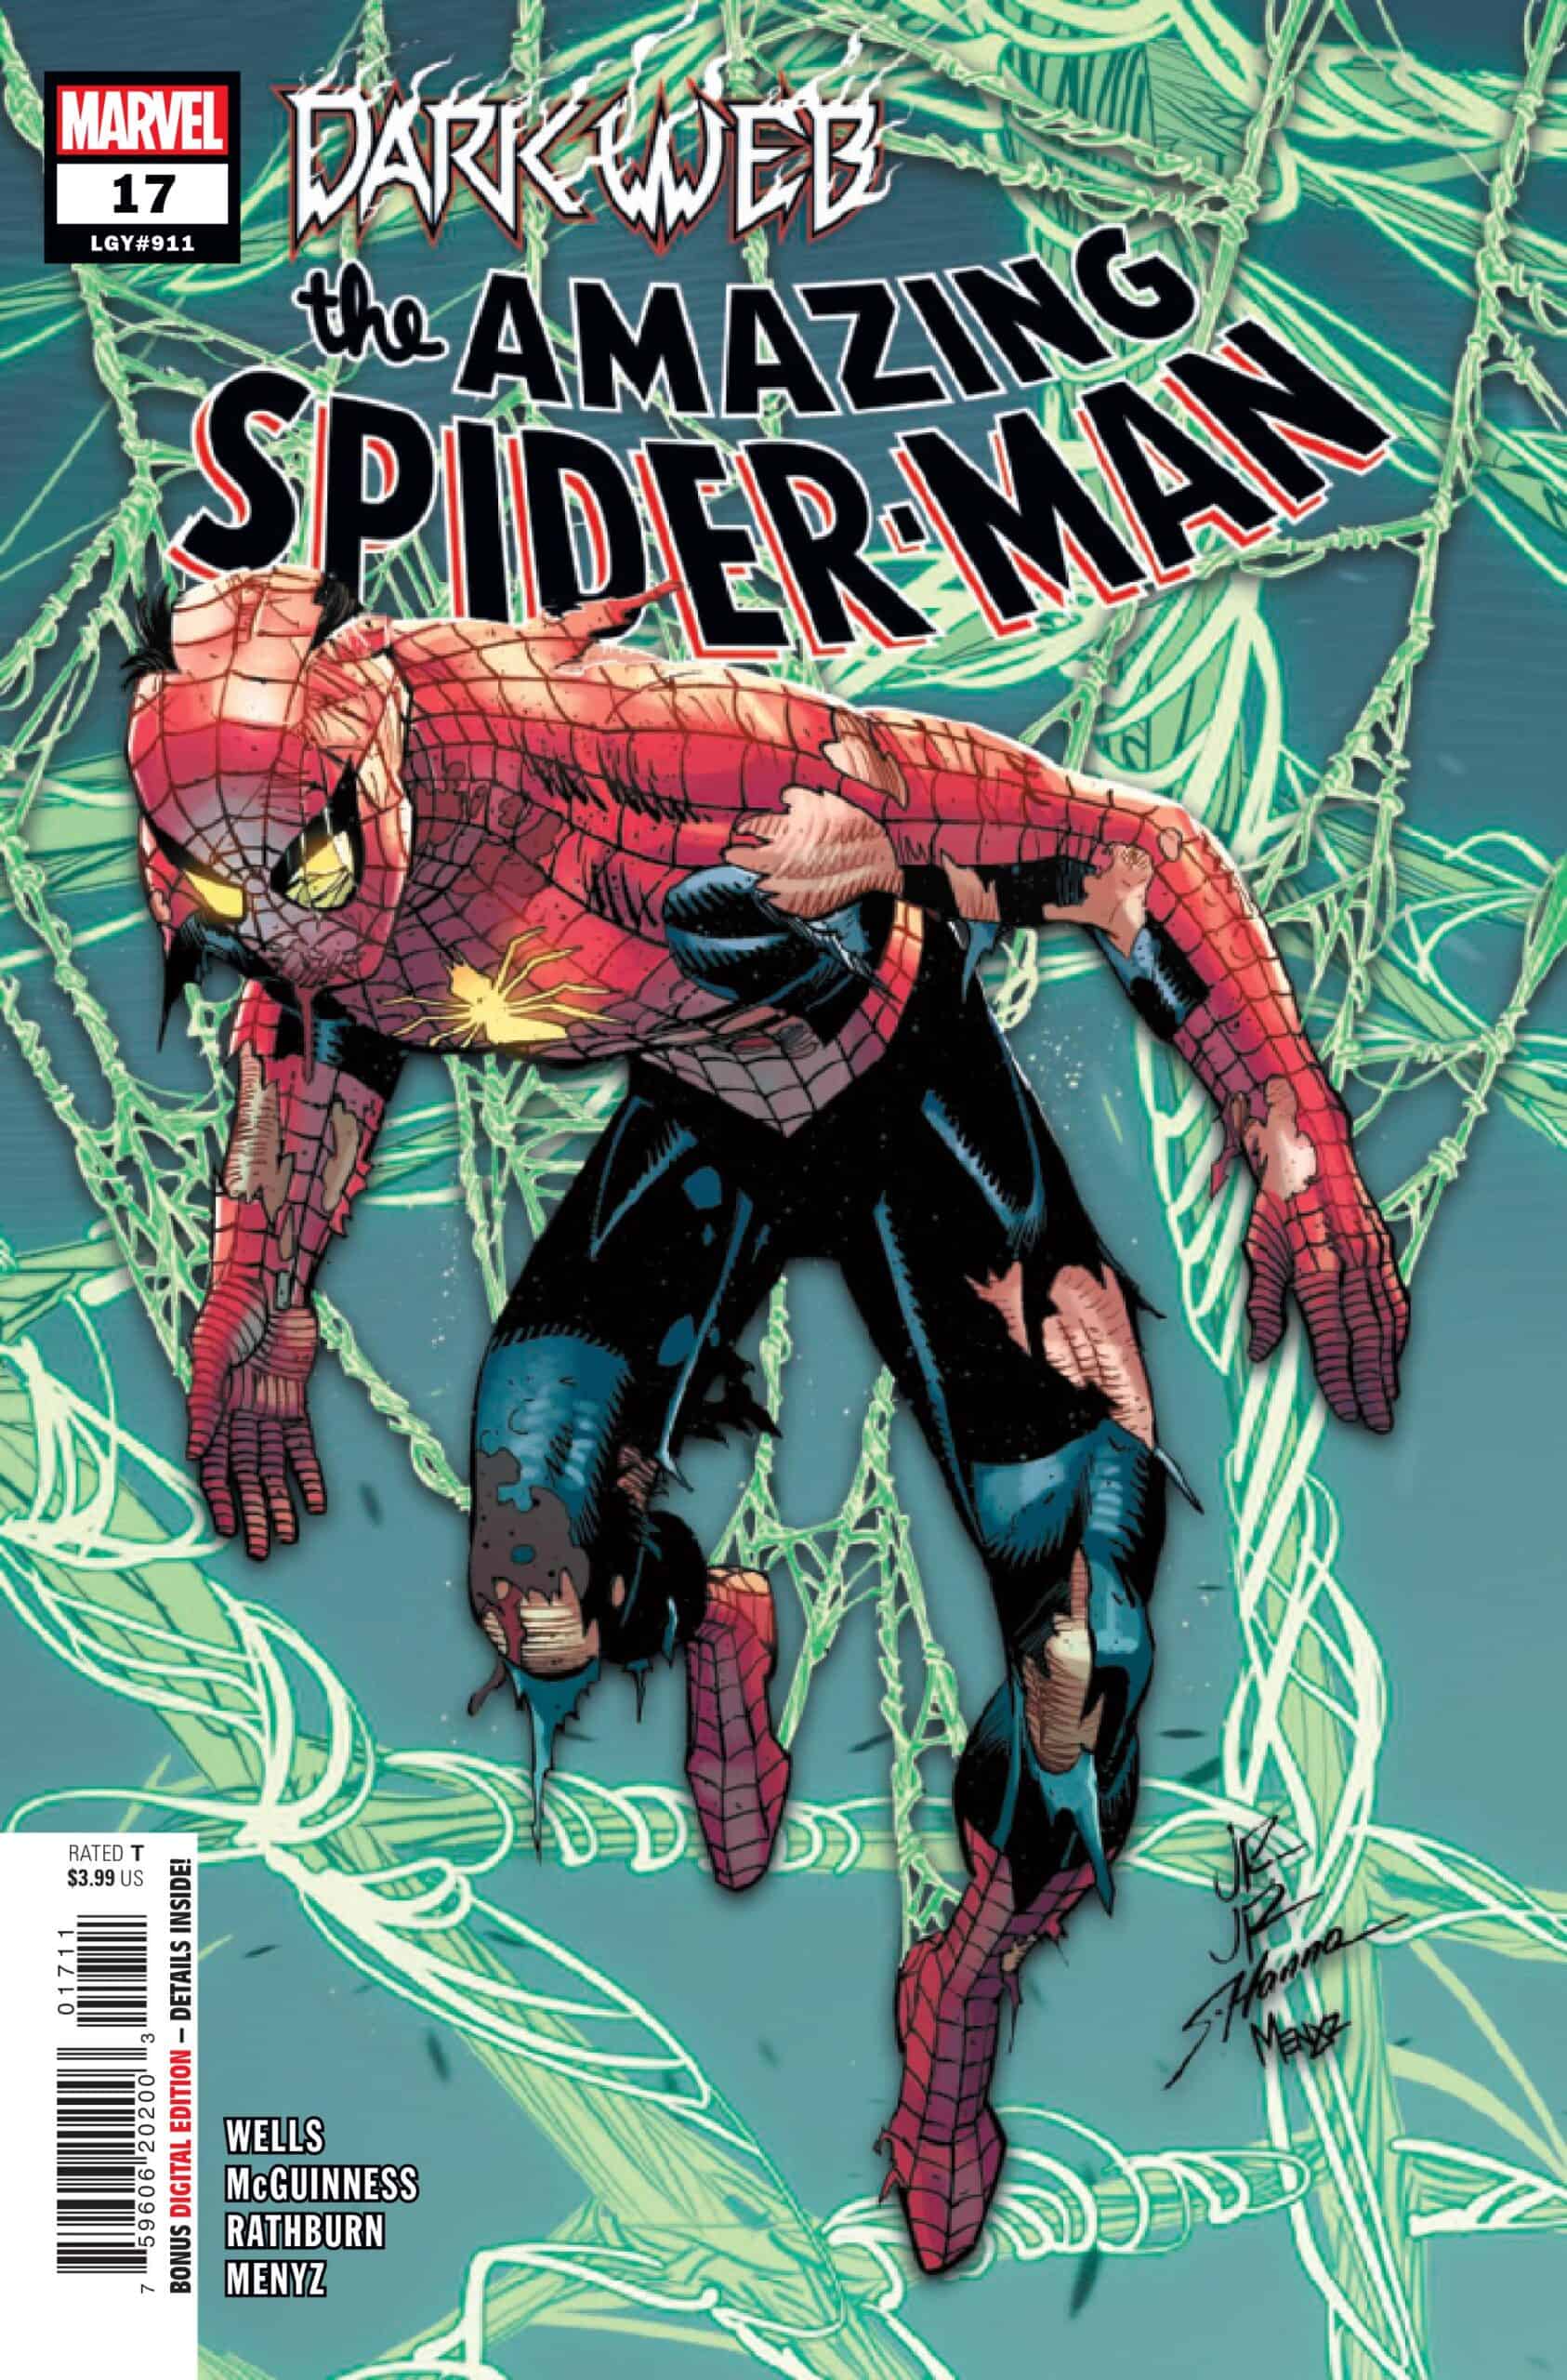 Marvel Comics Sneak Preview for January 11, 2023 Peter Parker Is